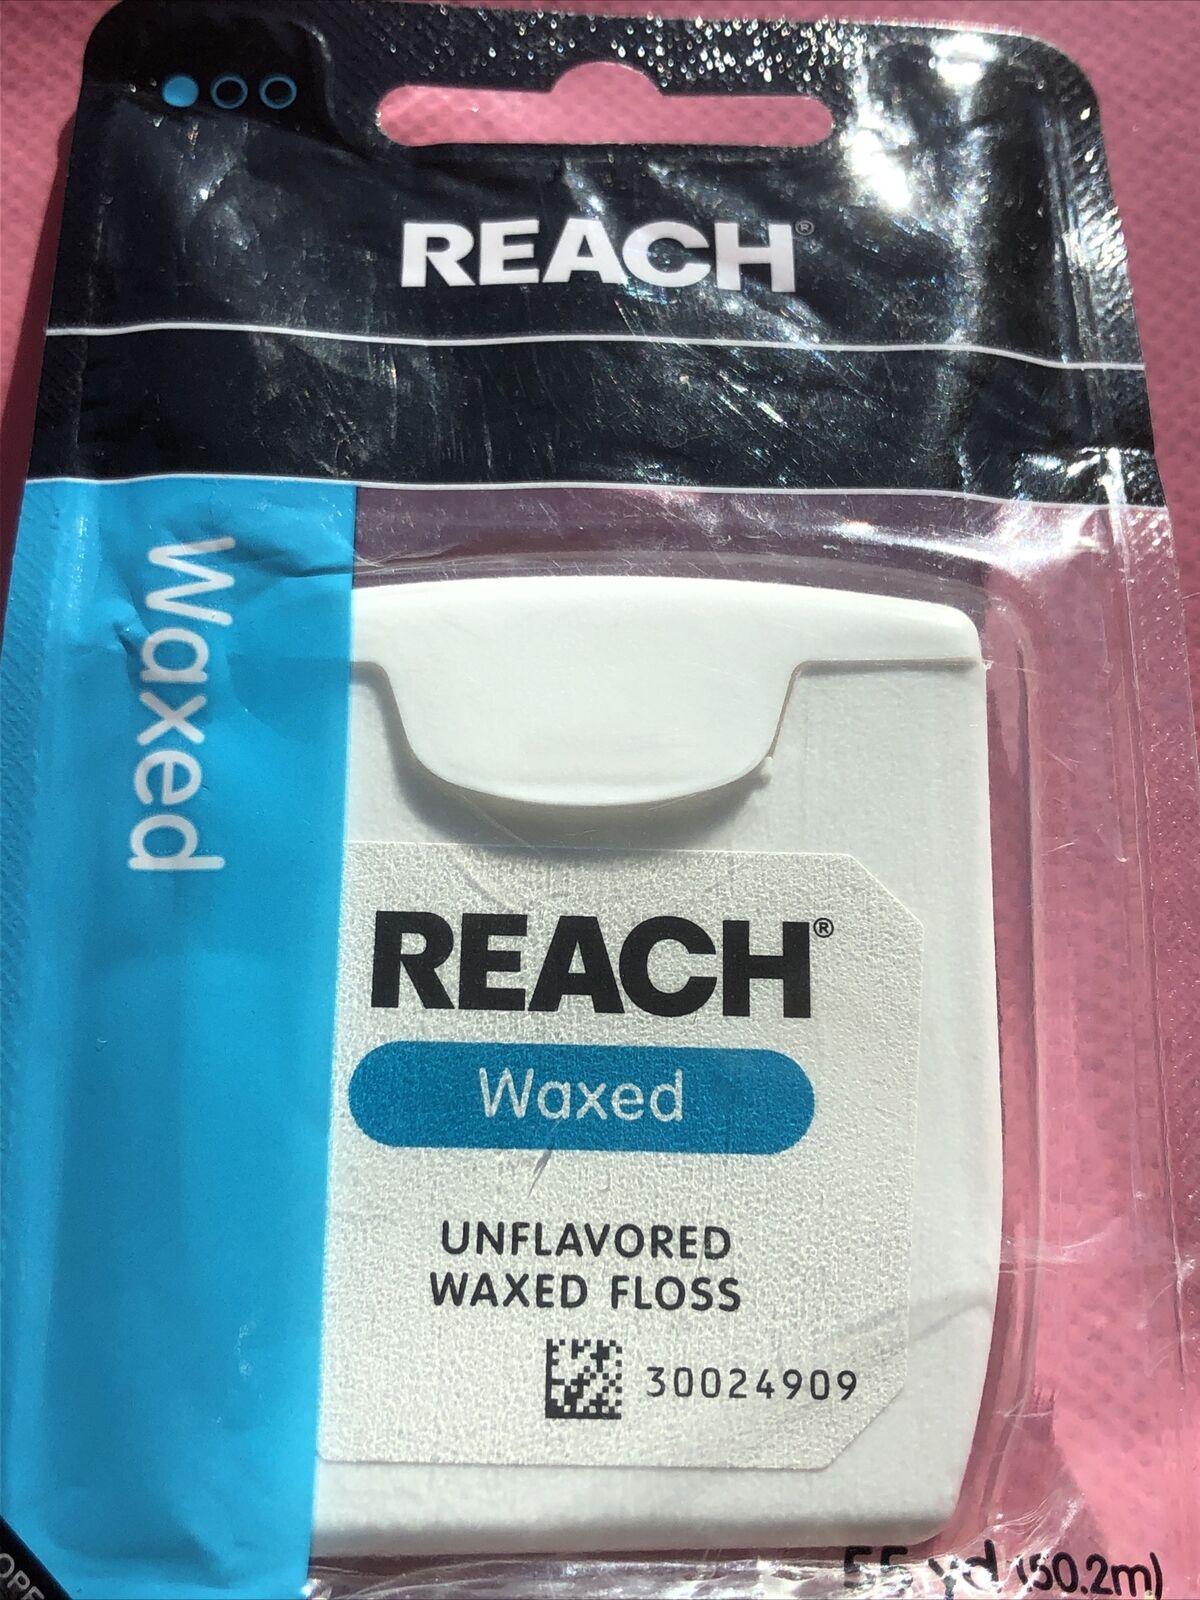 REACH Unflavored In stock Waxed Dental Baltimore Mall 55 yds Floss